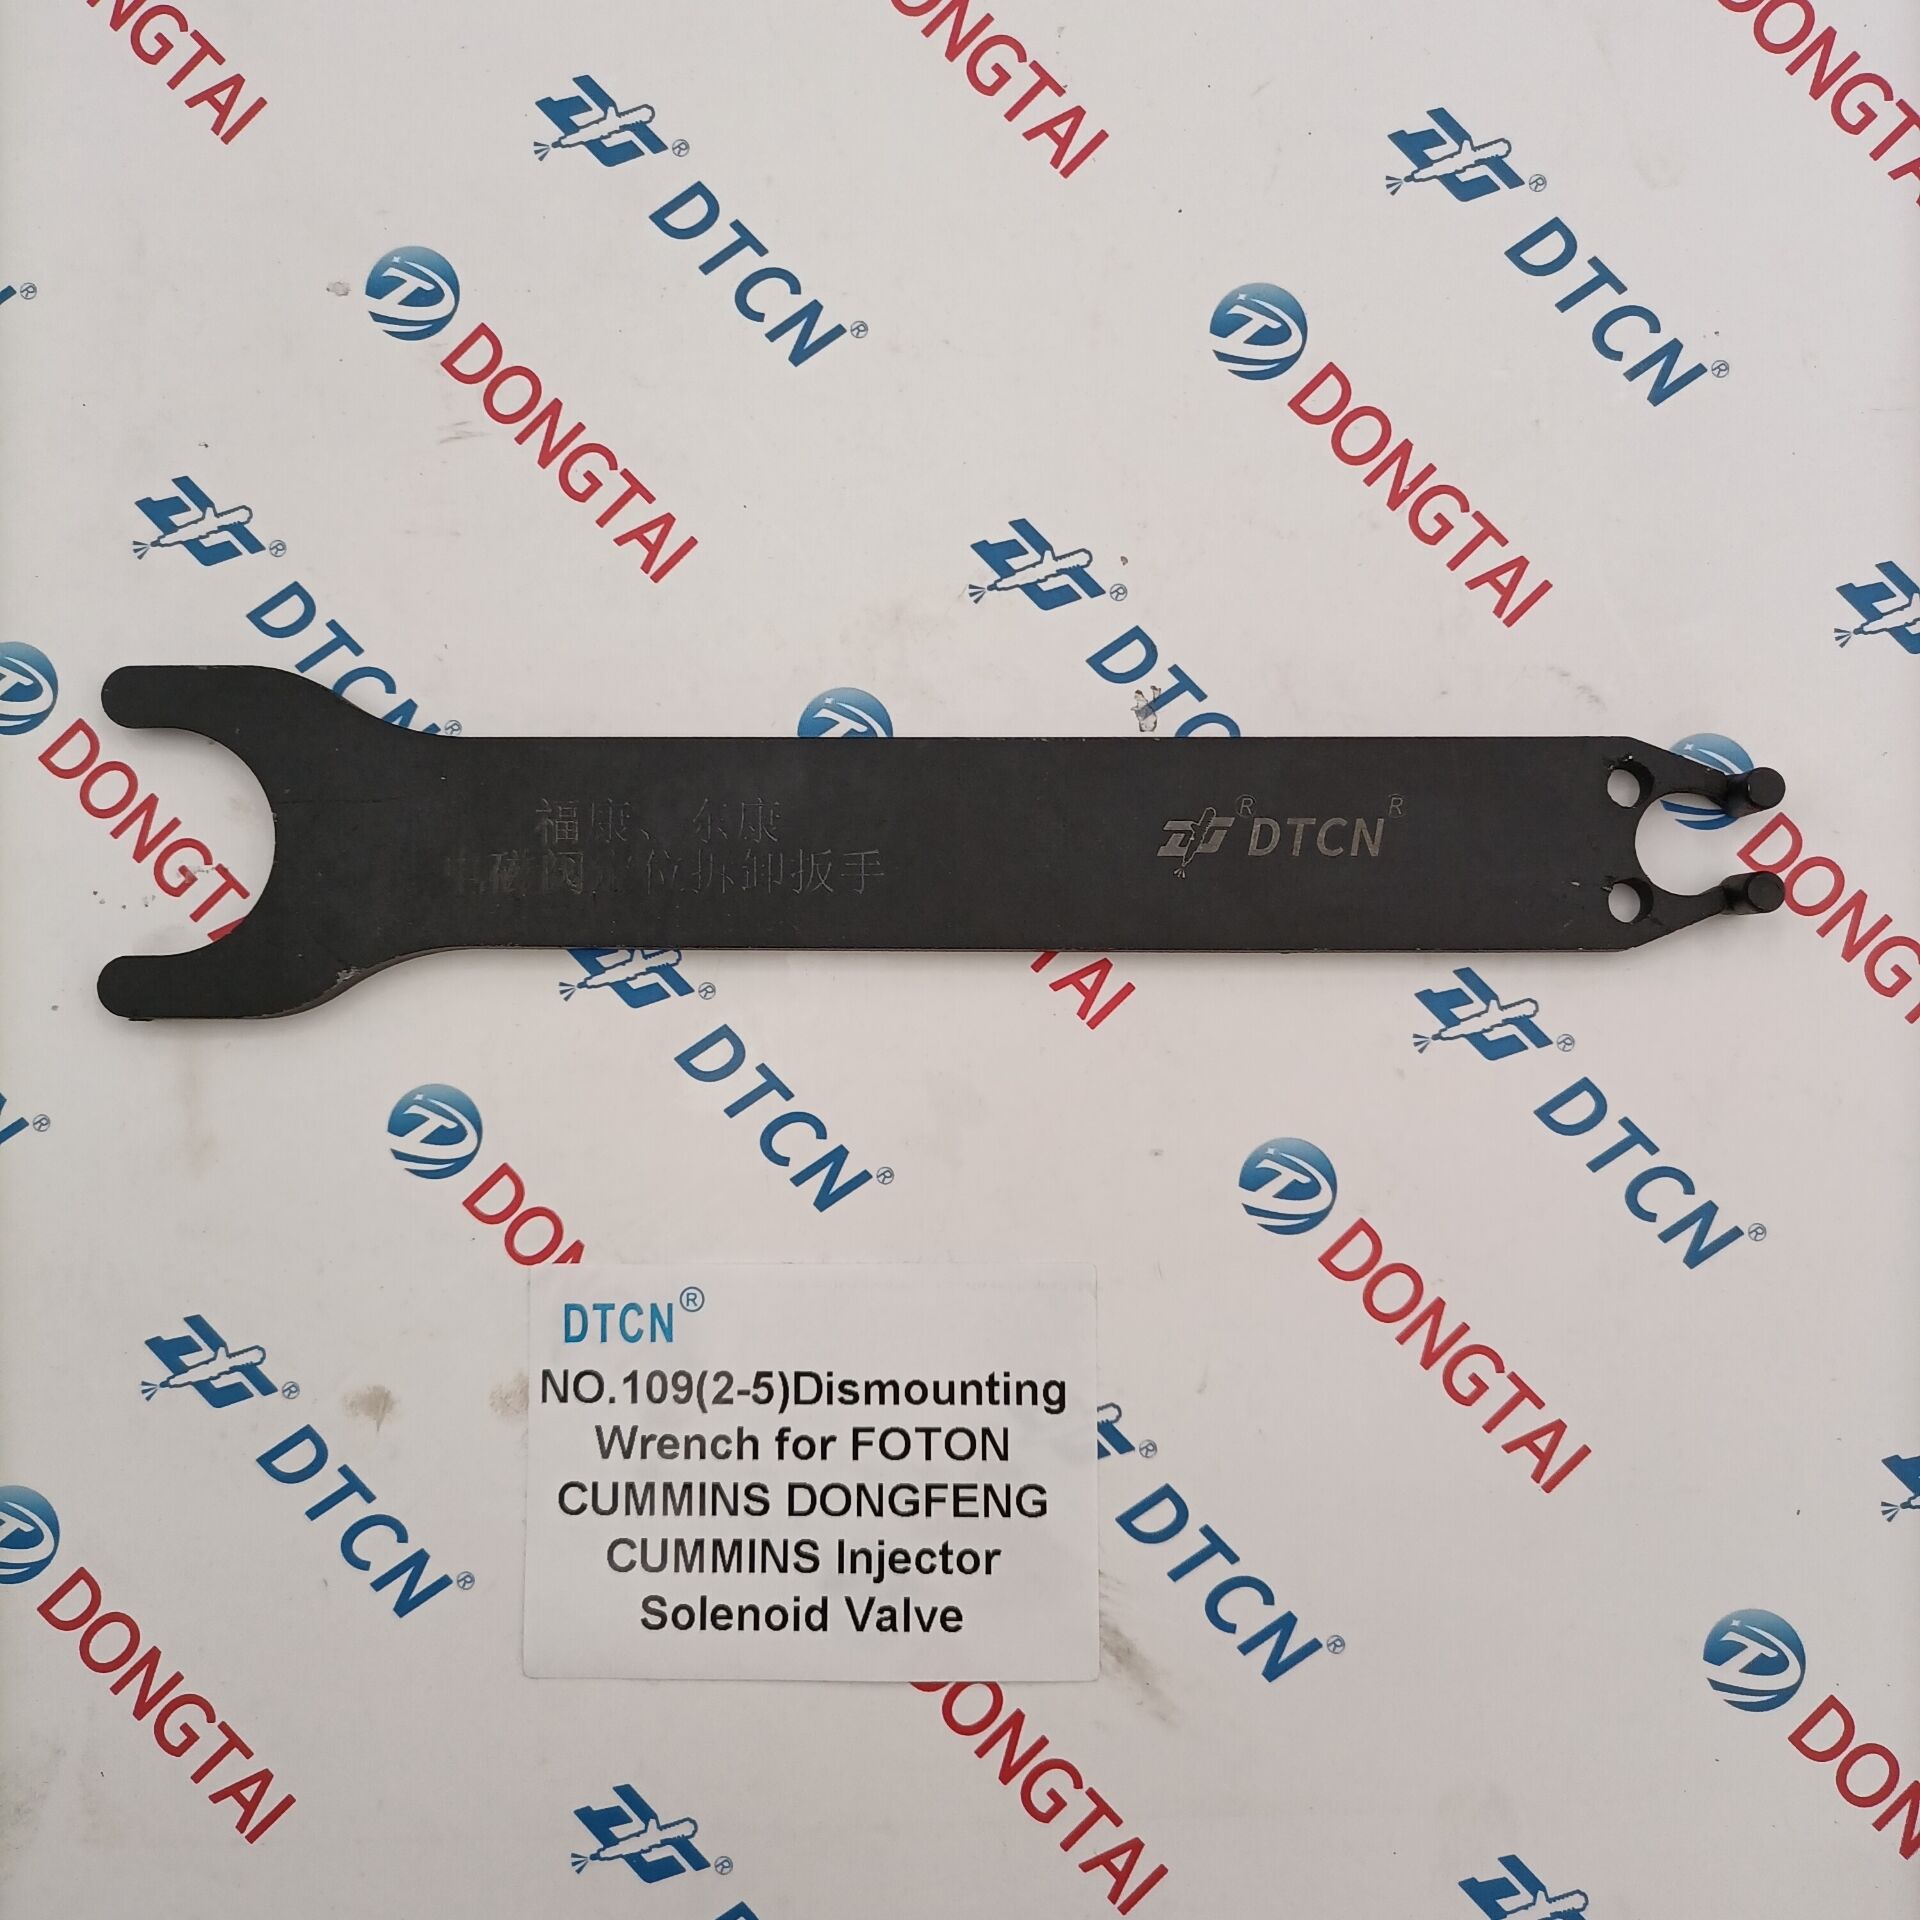 NO.109(2-5) Dismounting Wrench for FOTON CUMMINS DONGFENG CUMMINS injector Solenoid Valve